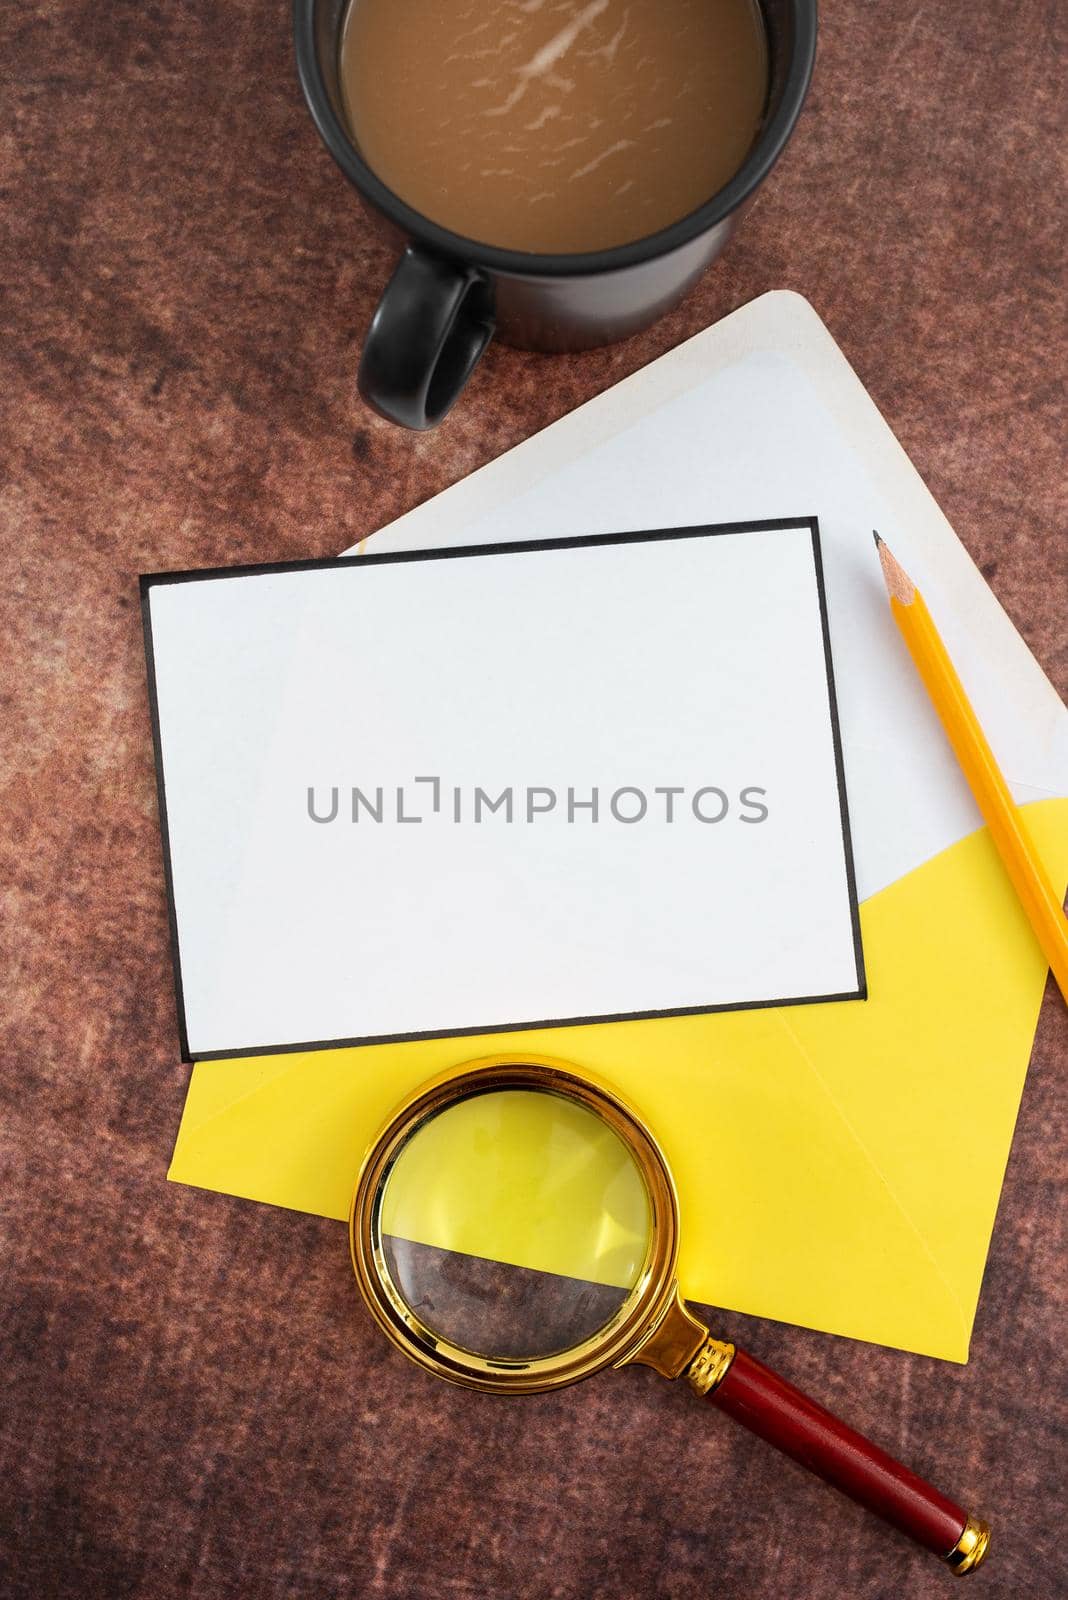 Blank Letter With Color Envelope, Pencil, Coffee Mug And Magnifying Glass Placed On Table. It Is Representing Important Strategies And Crucial Message For Business Progress. by nialowwa